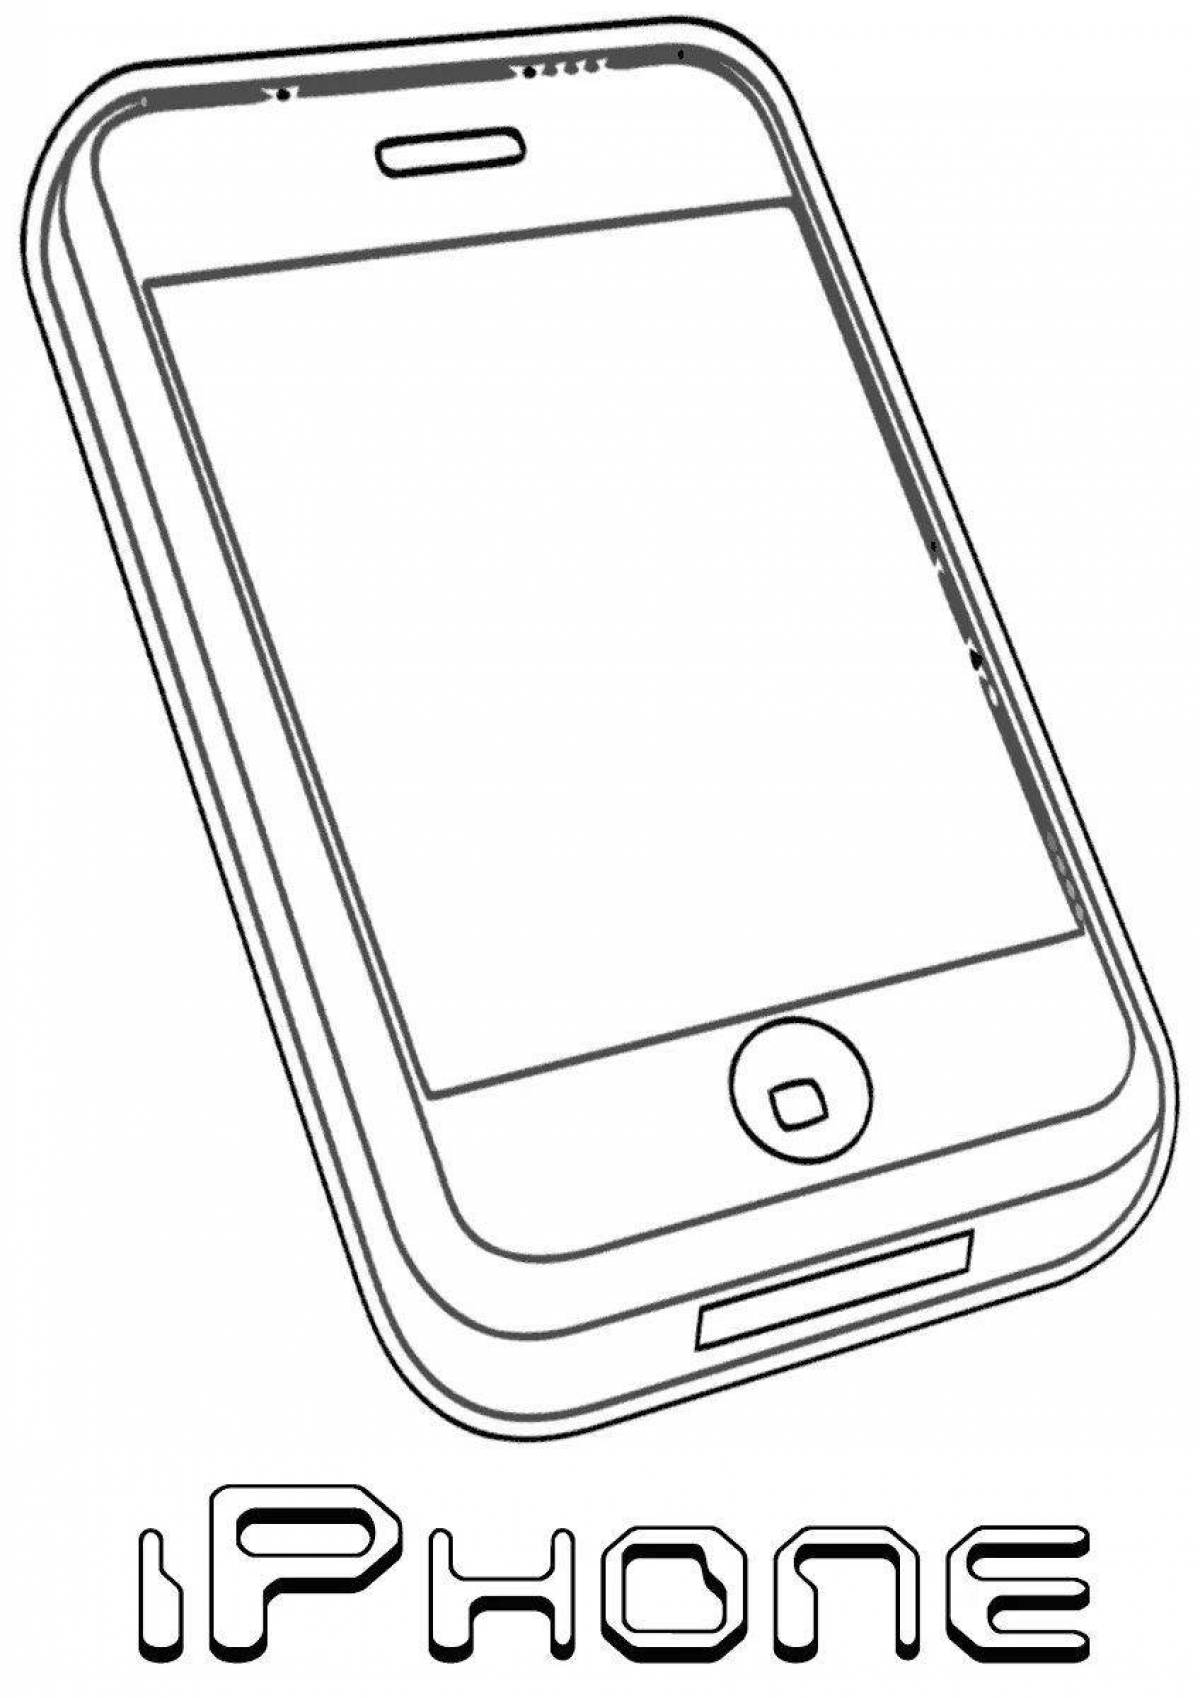 Colorful sibling iphone coloring page